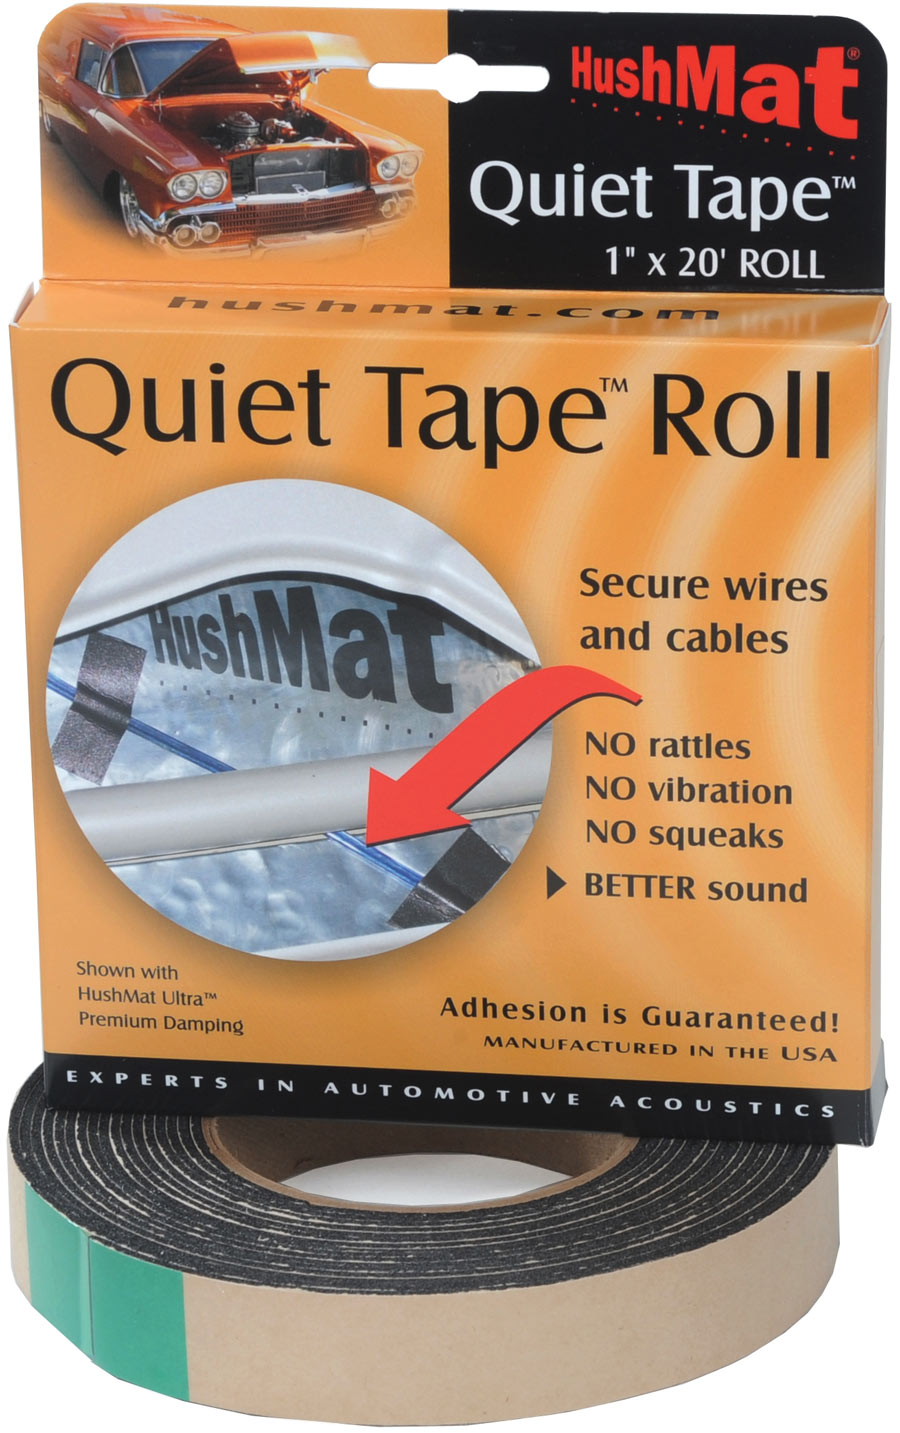 Quiet tape is used to cover and protect the wires of electronic components. It can also be used between surfaces to prevent rattles and unnecessary wear and tear.